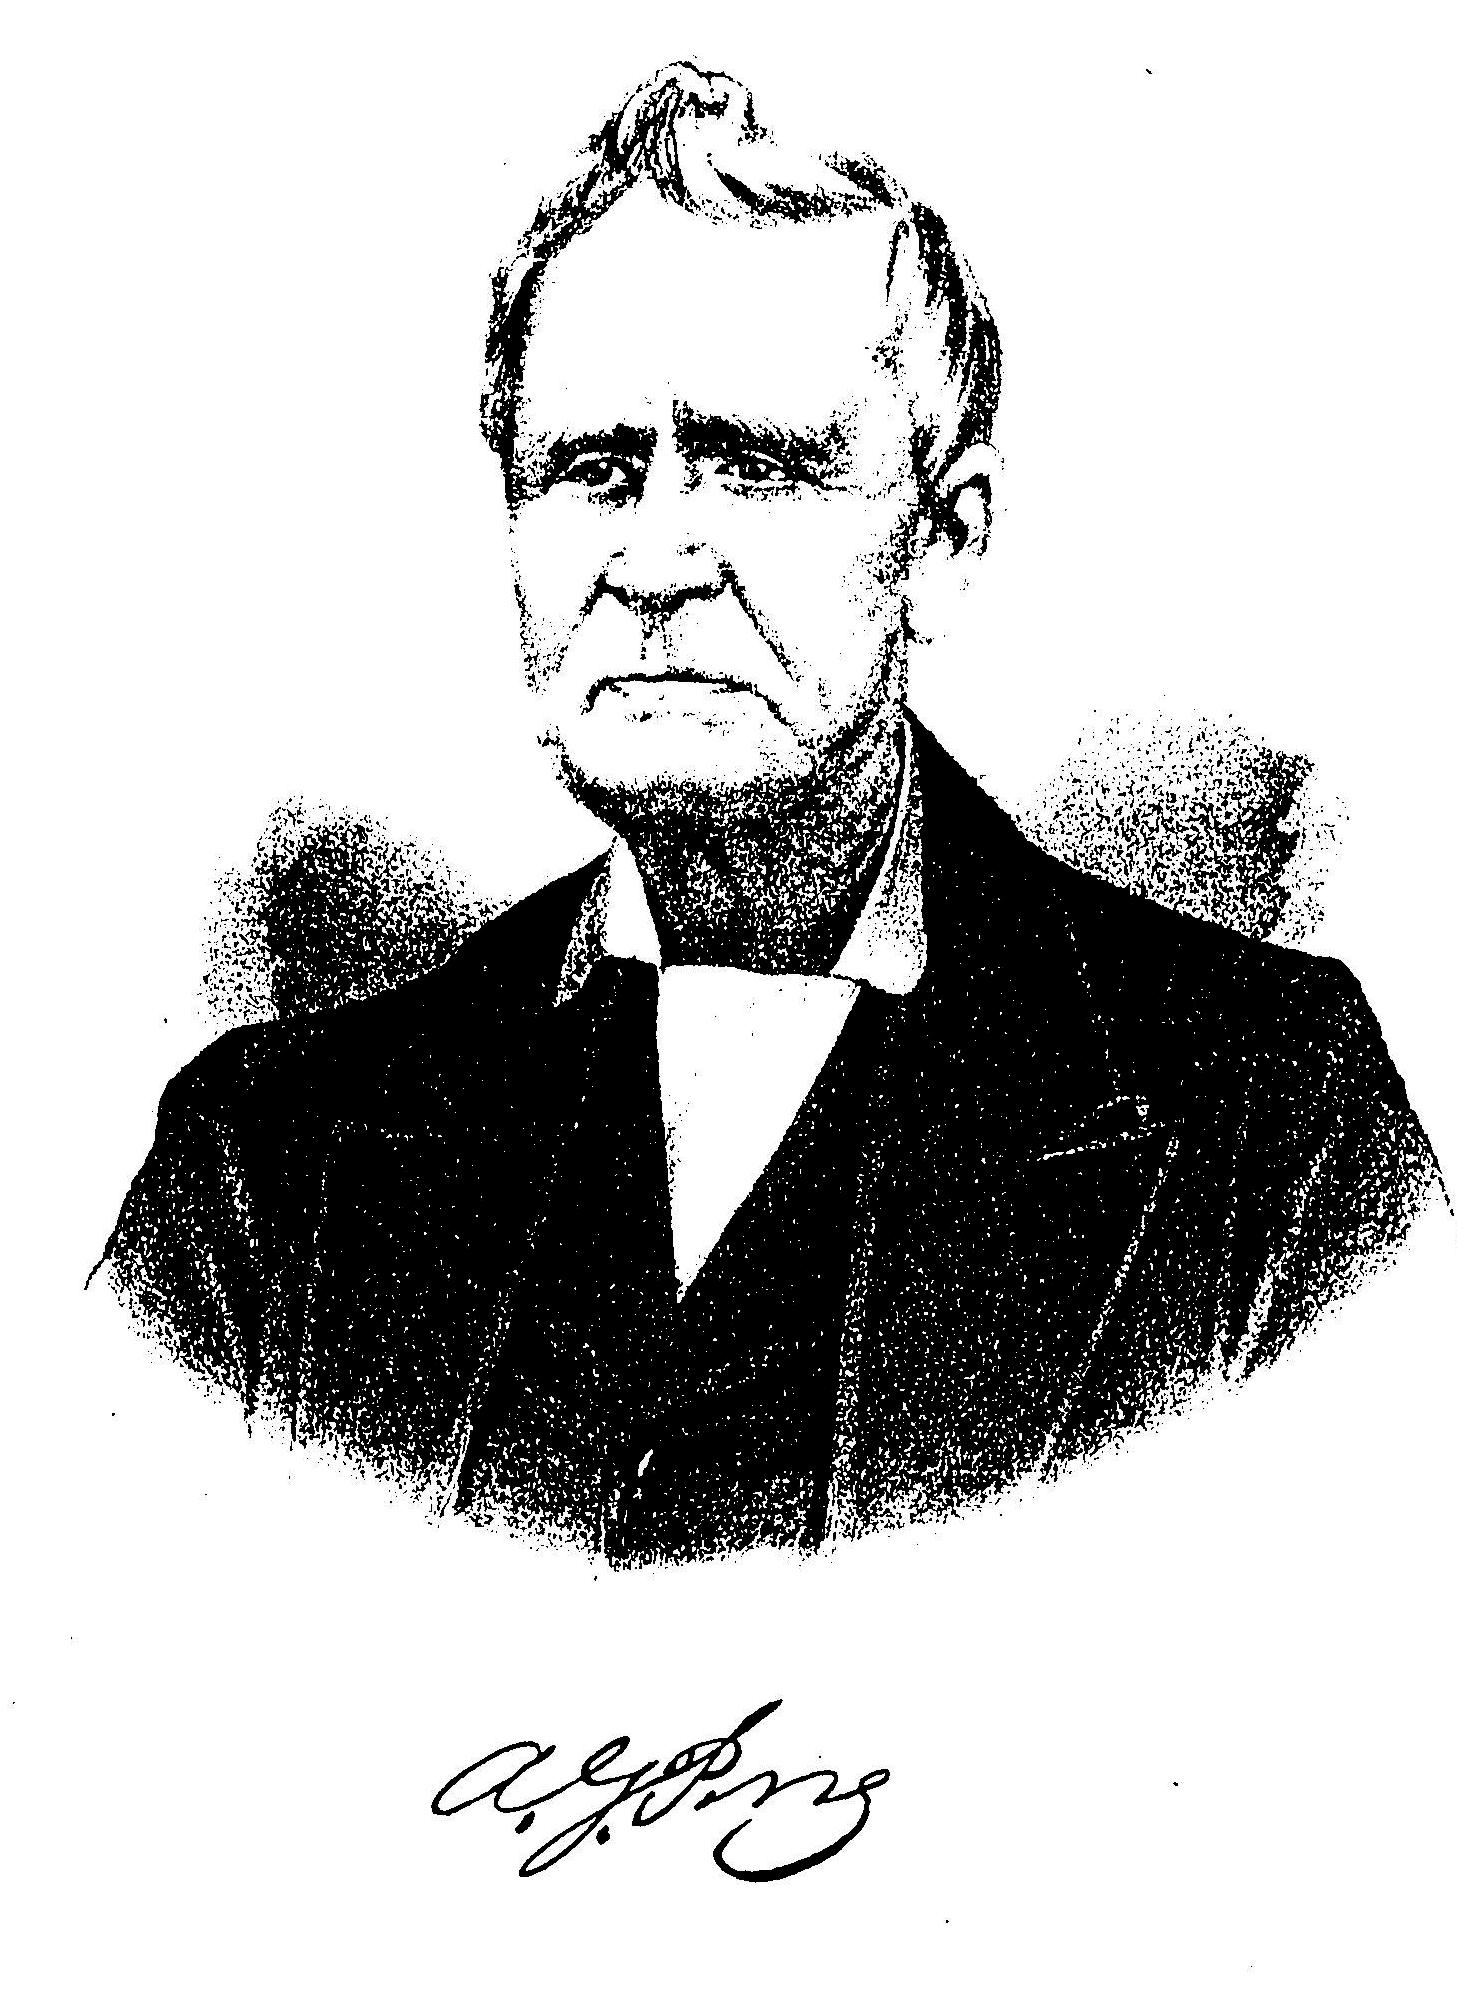 Albert G. Perry (From Memorial and Biographical History of McLennan, Falls, Bell and Coryell Counties Texas, 1893; courtesy descendant David Perry)